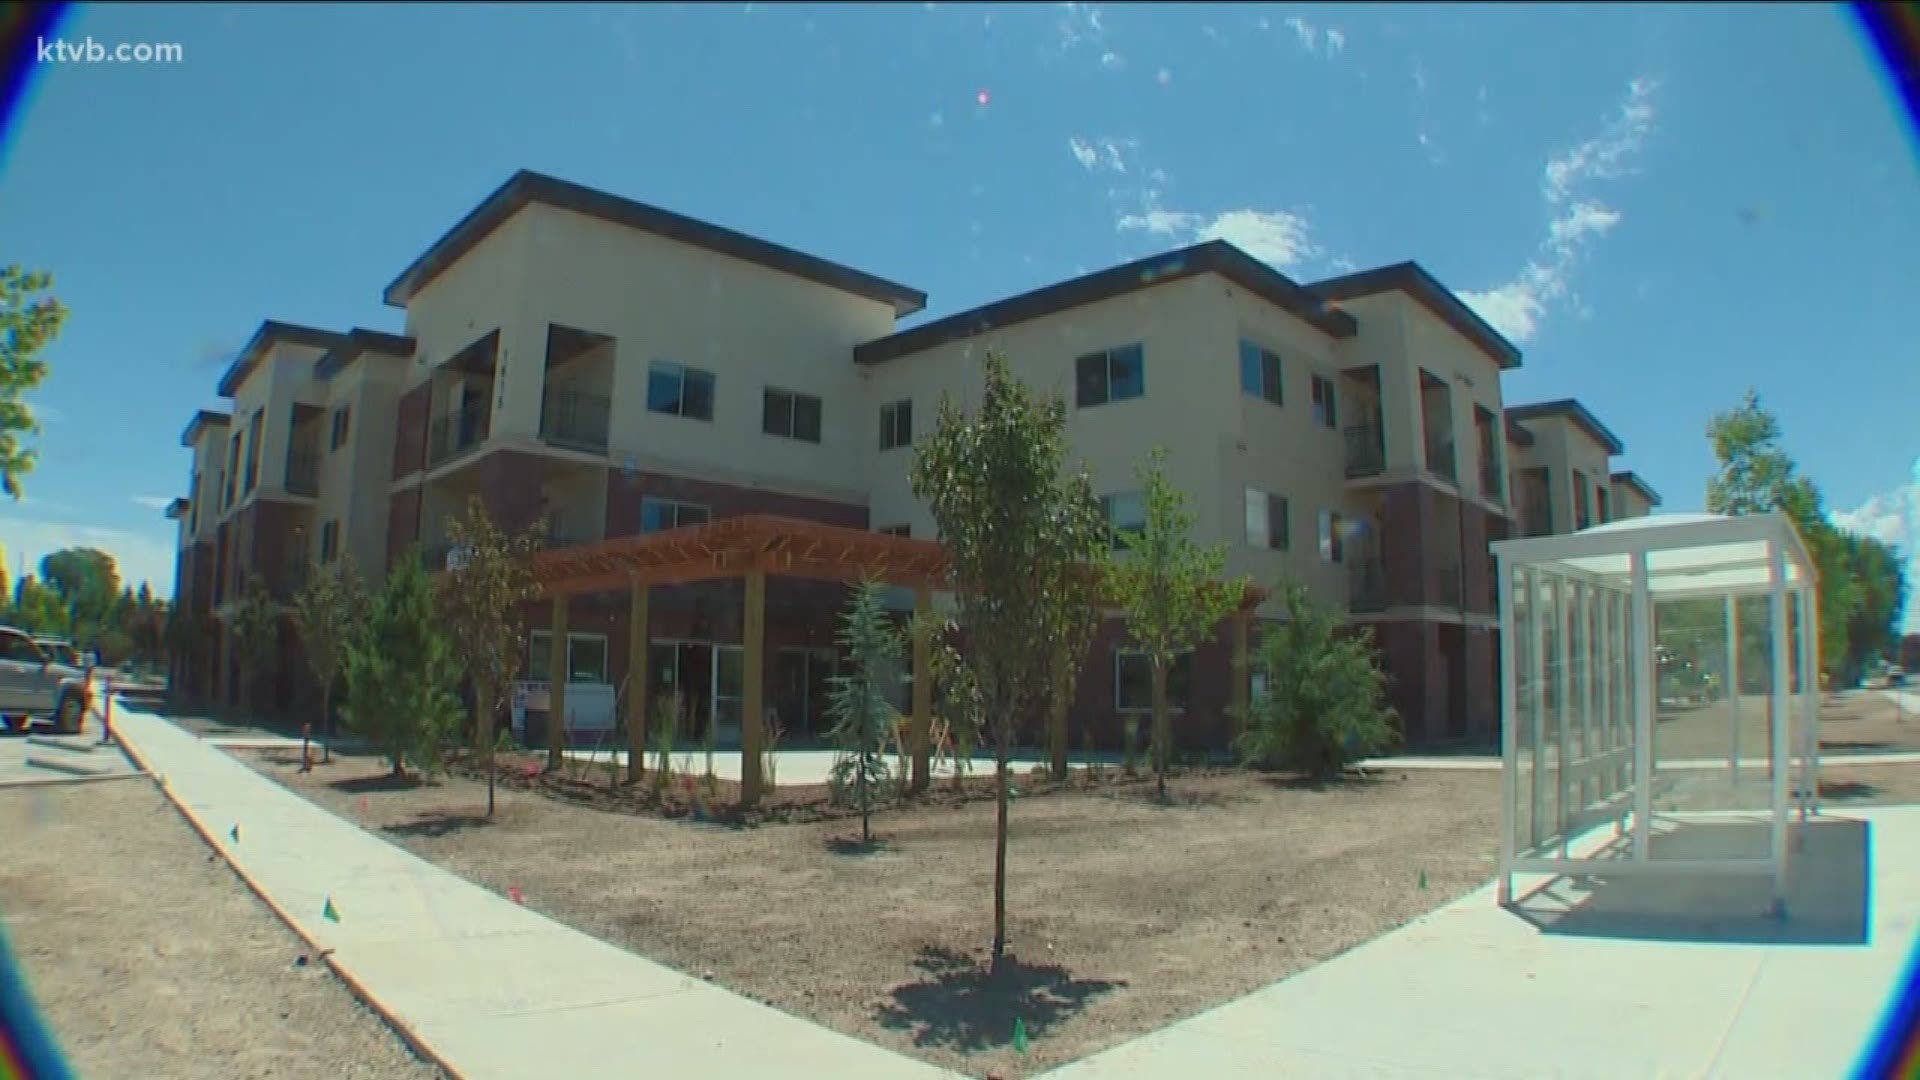 The Mercy Creek apartment complex is for seniors age 55 and up.